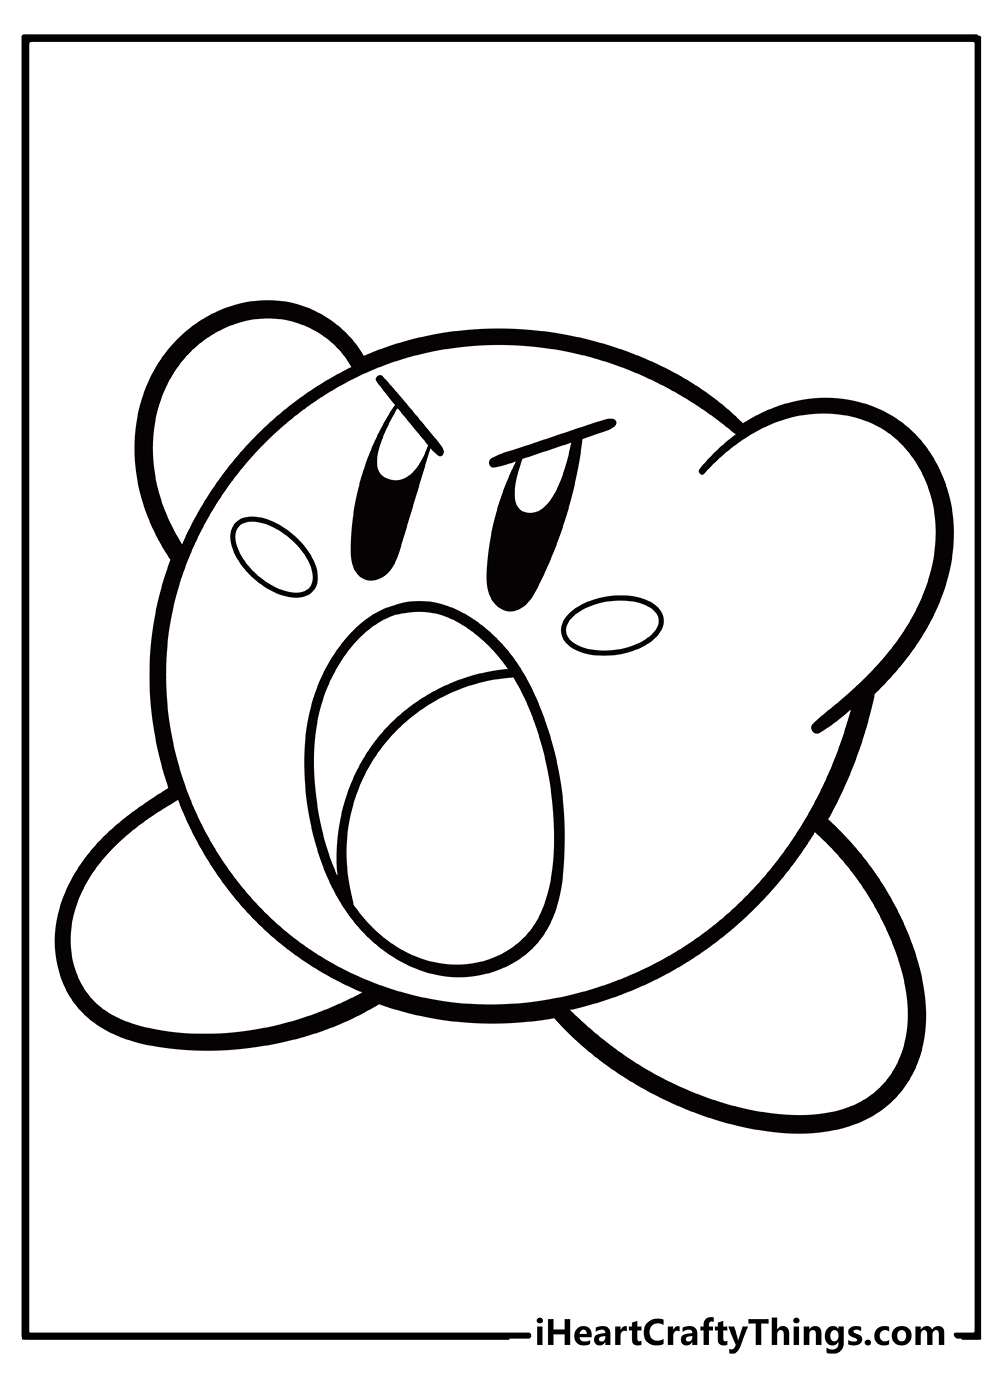 Kirby Coloring Book for adults free download